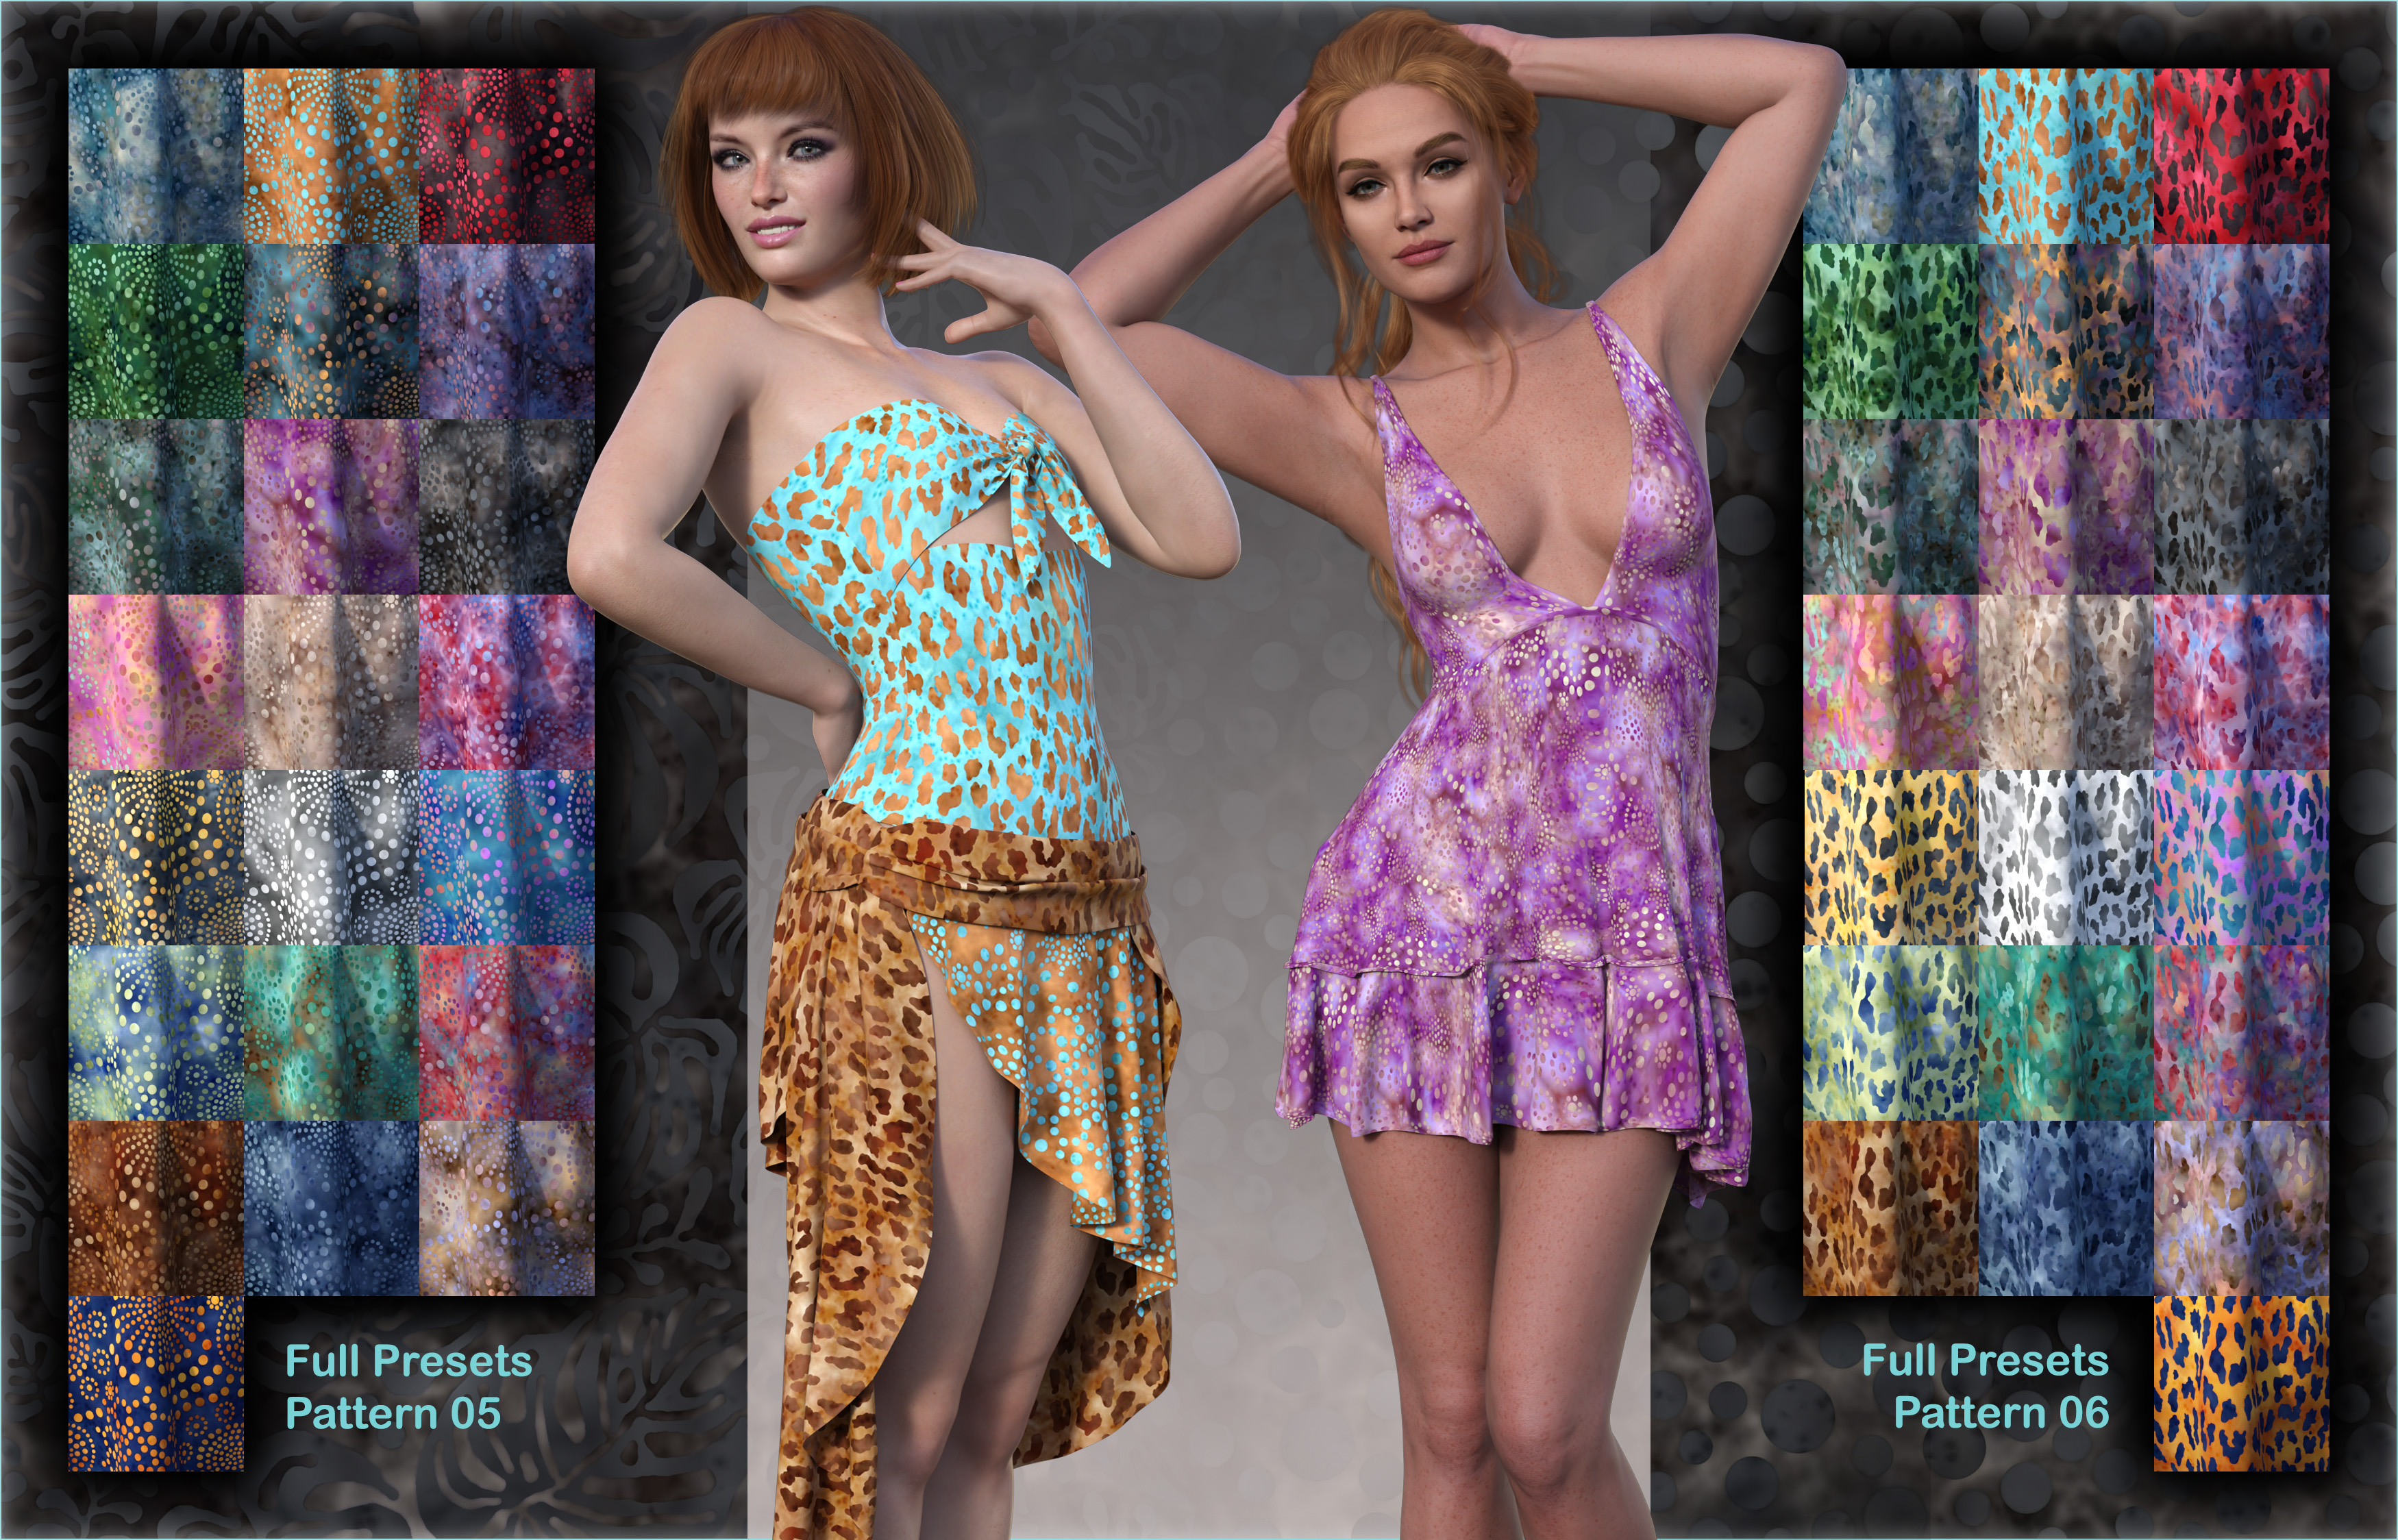 Pd Batik Iray Shaders by: parrotdolphin, 3D Models by Daz 3D